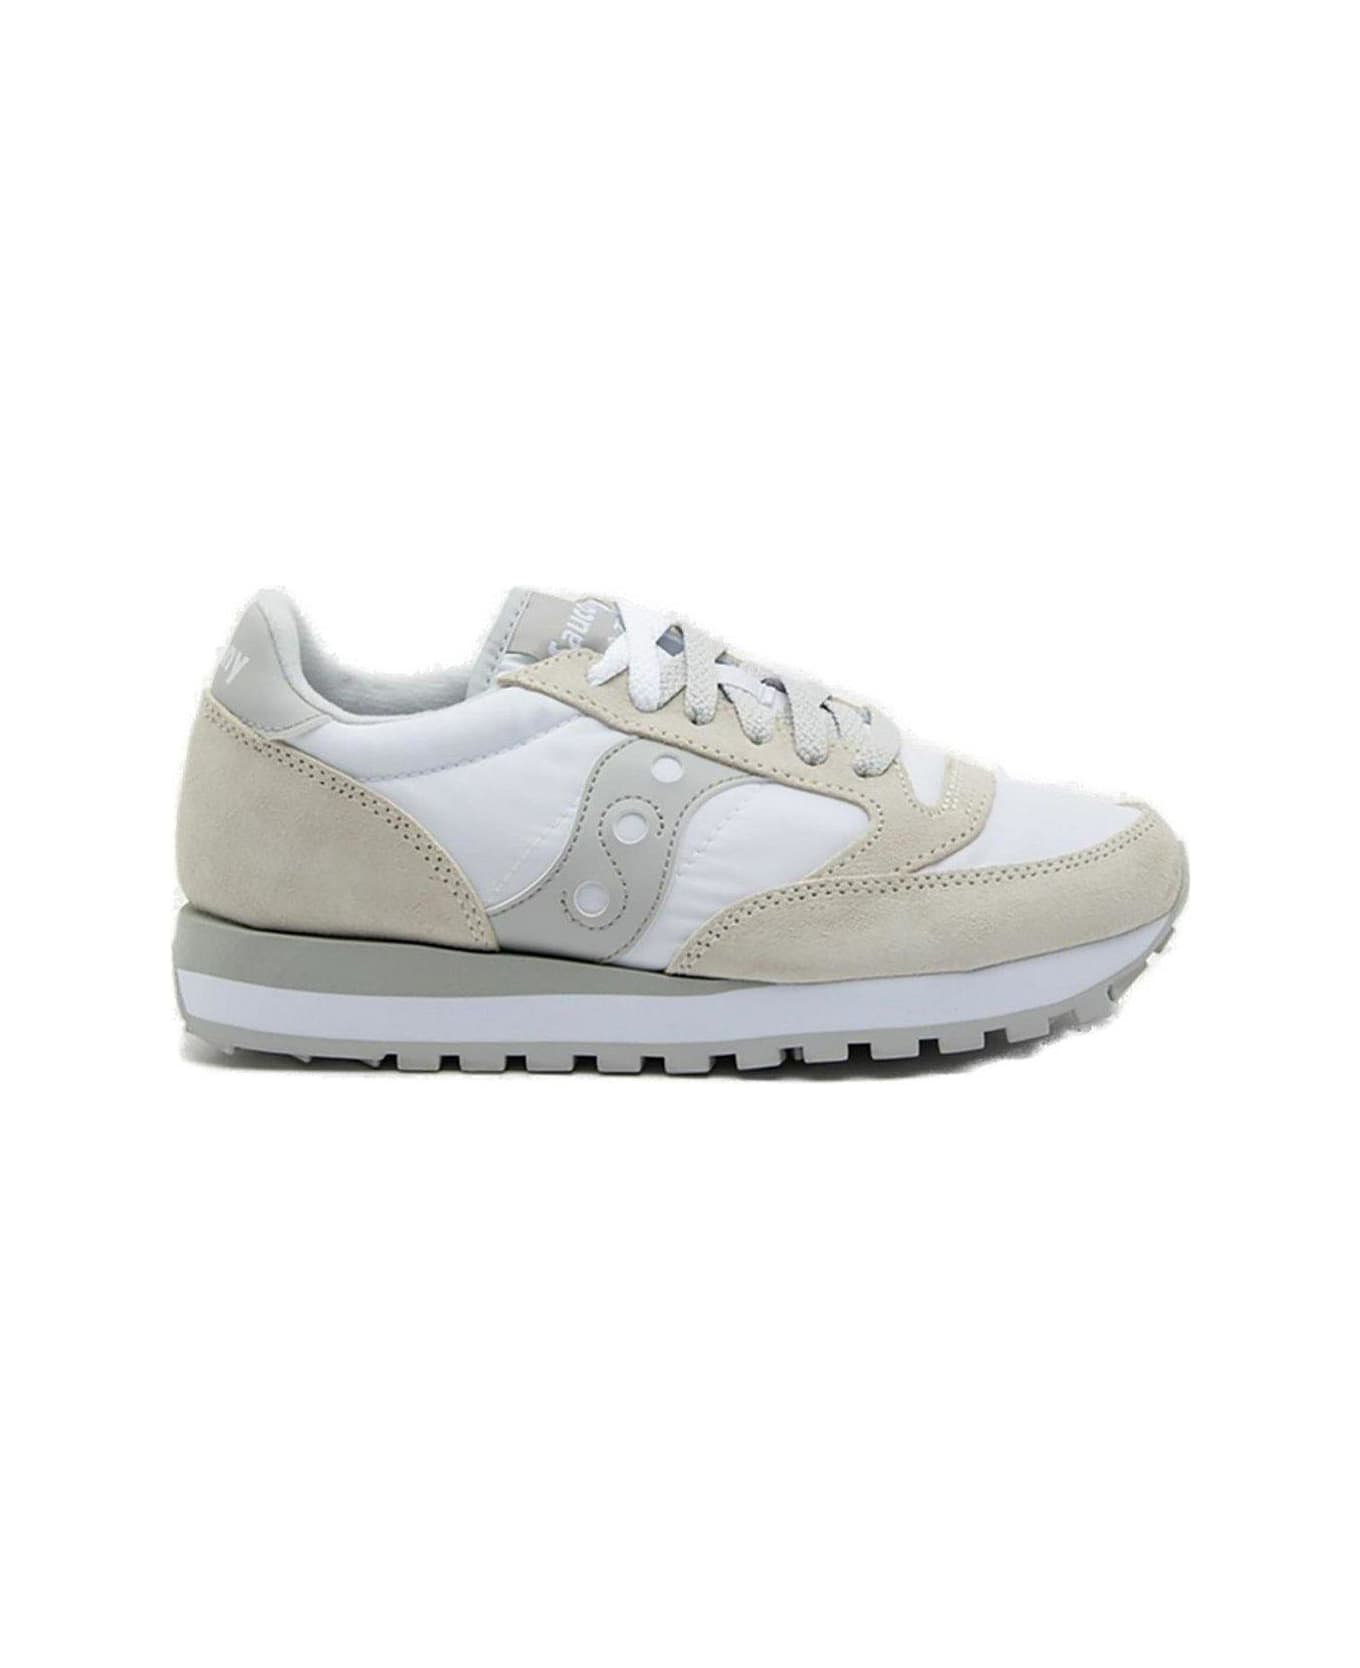 Saucony Jazz Original Lace-up Sneakers - White/grey